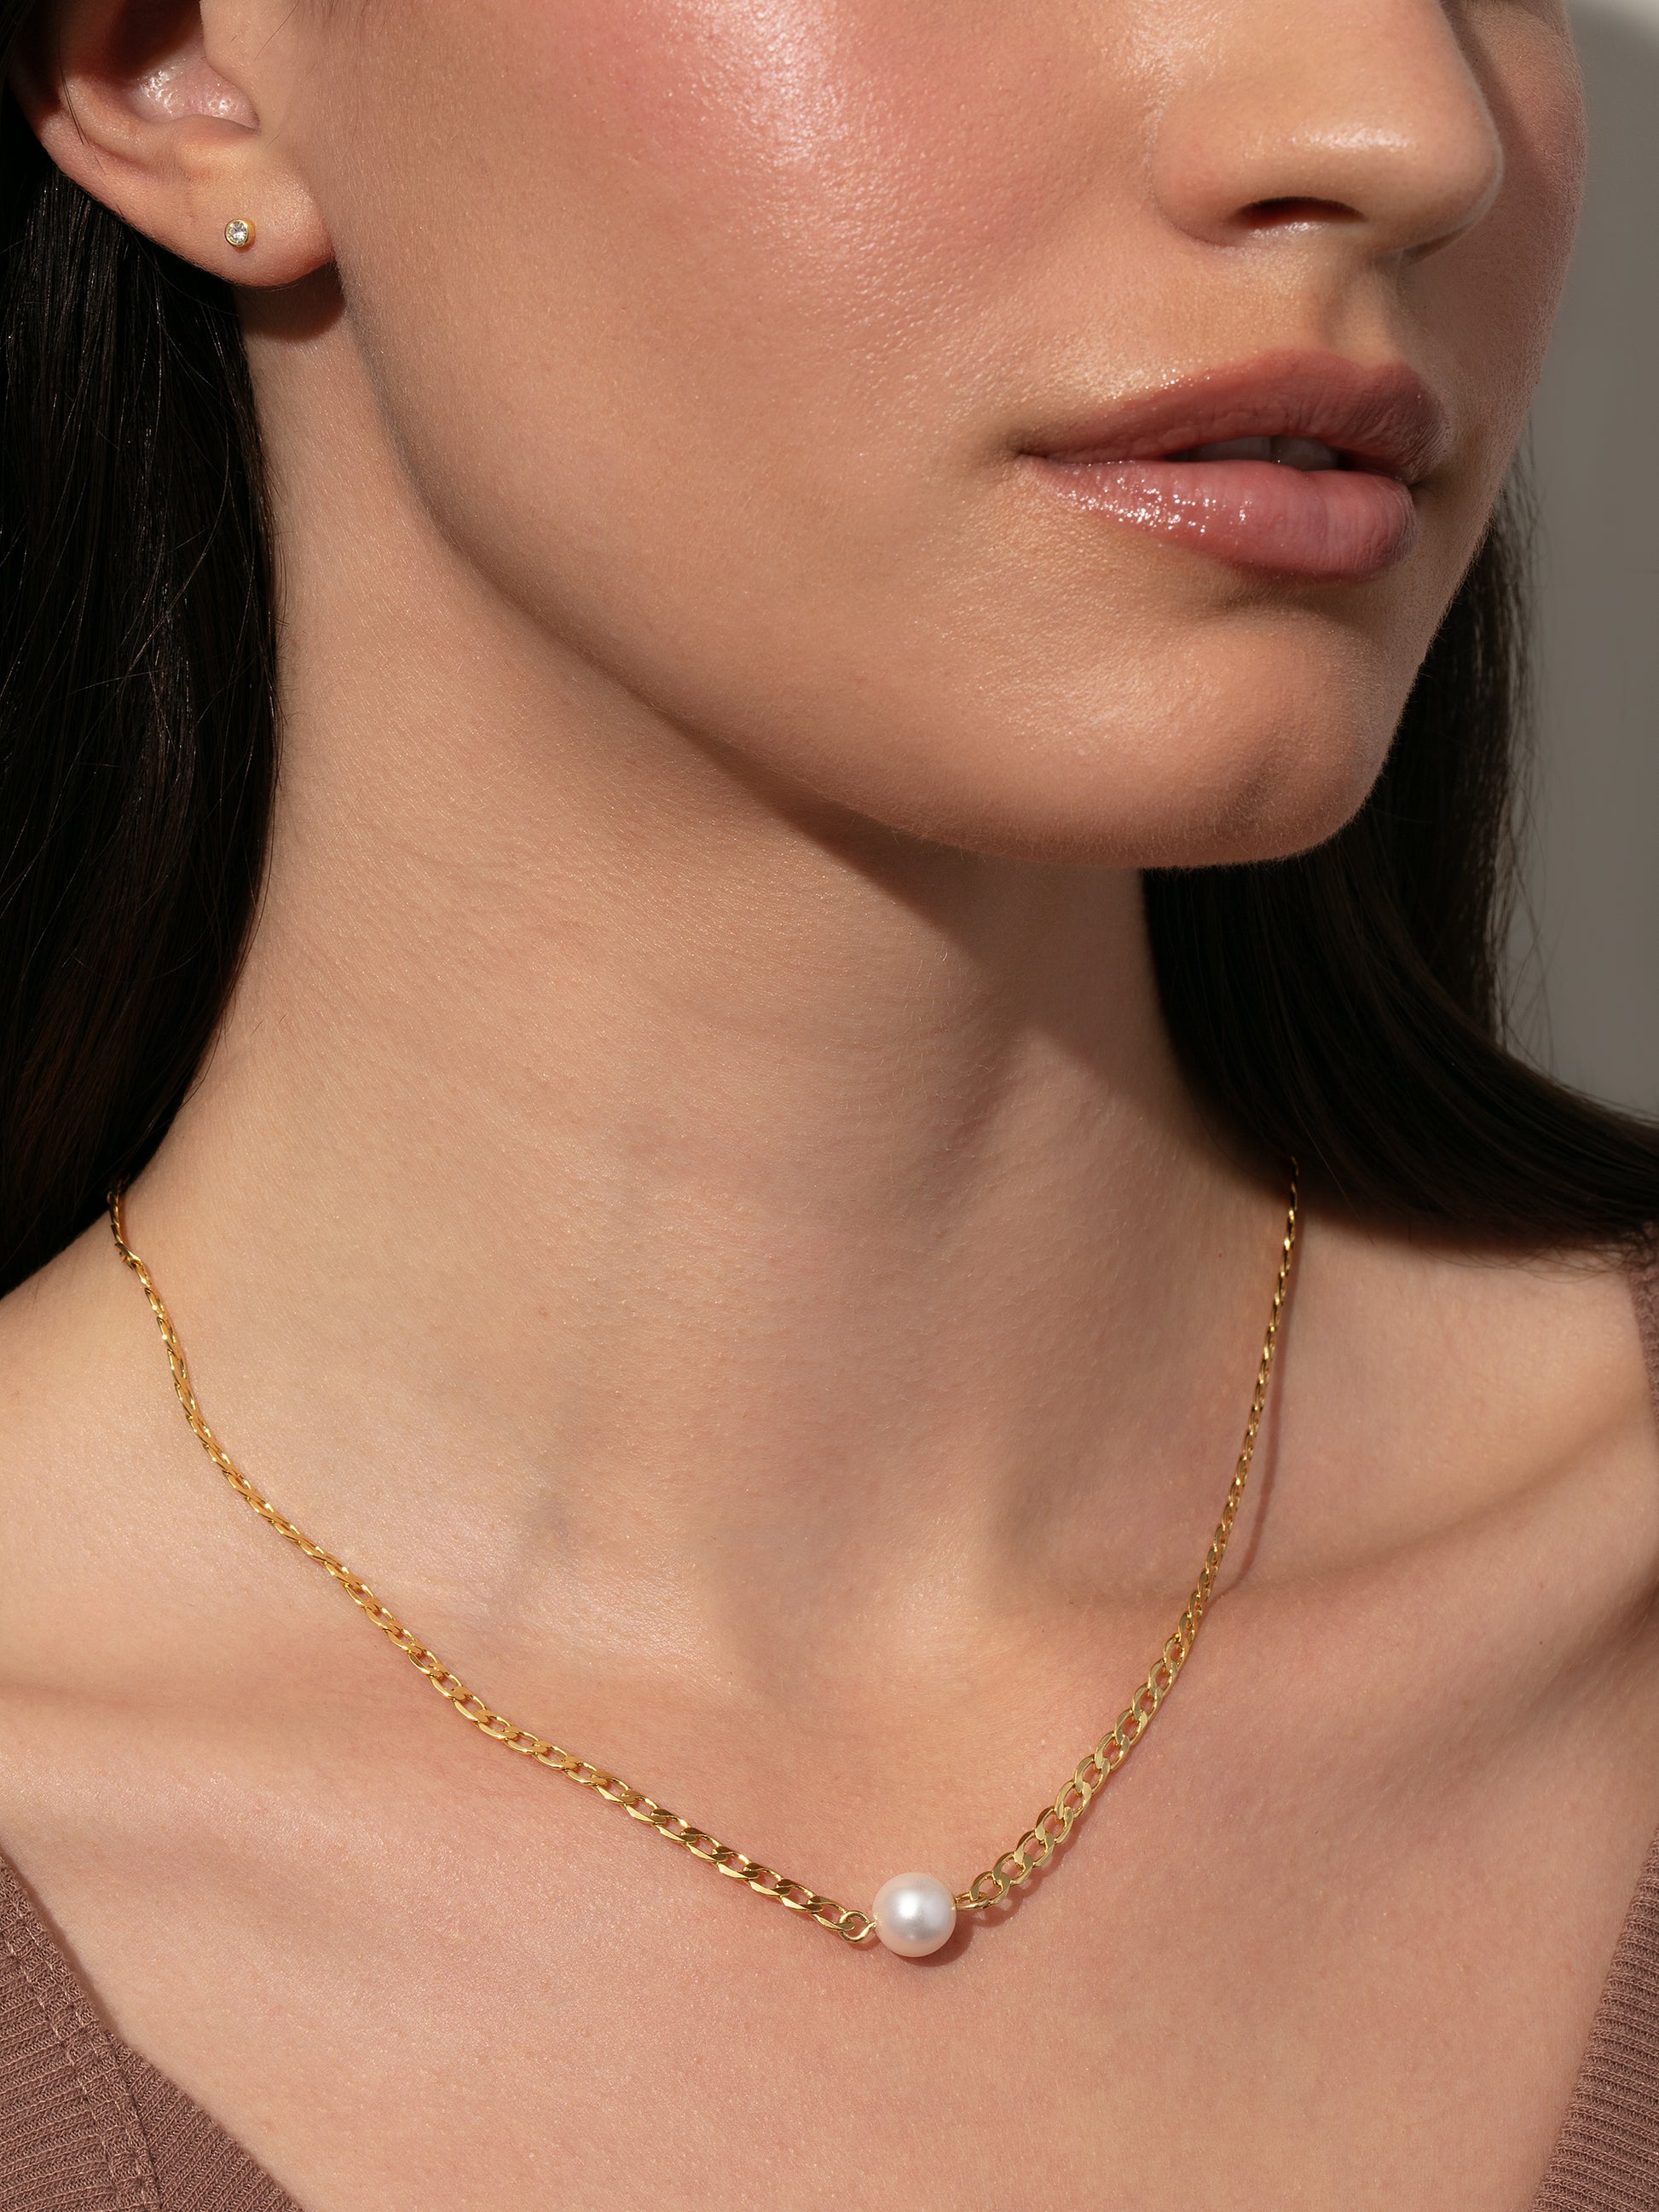 Statement Pearl Necklace | Gold | Model Image | Uncommon James